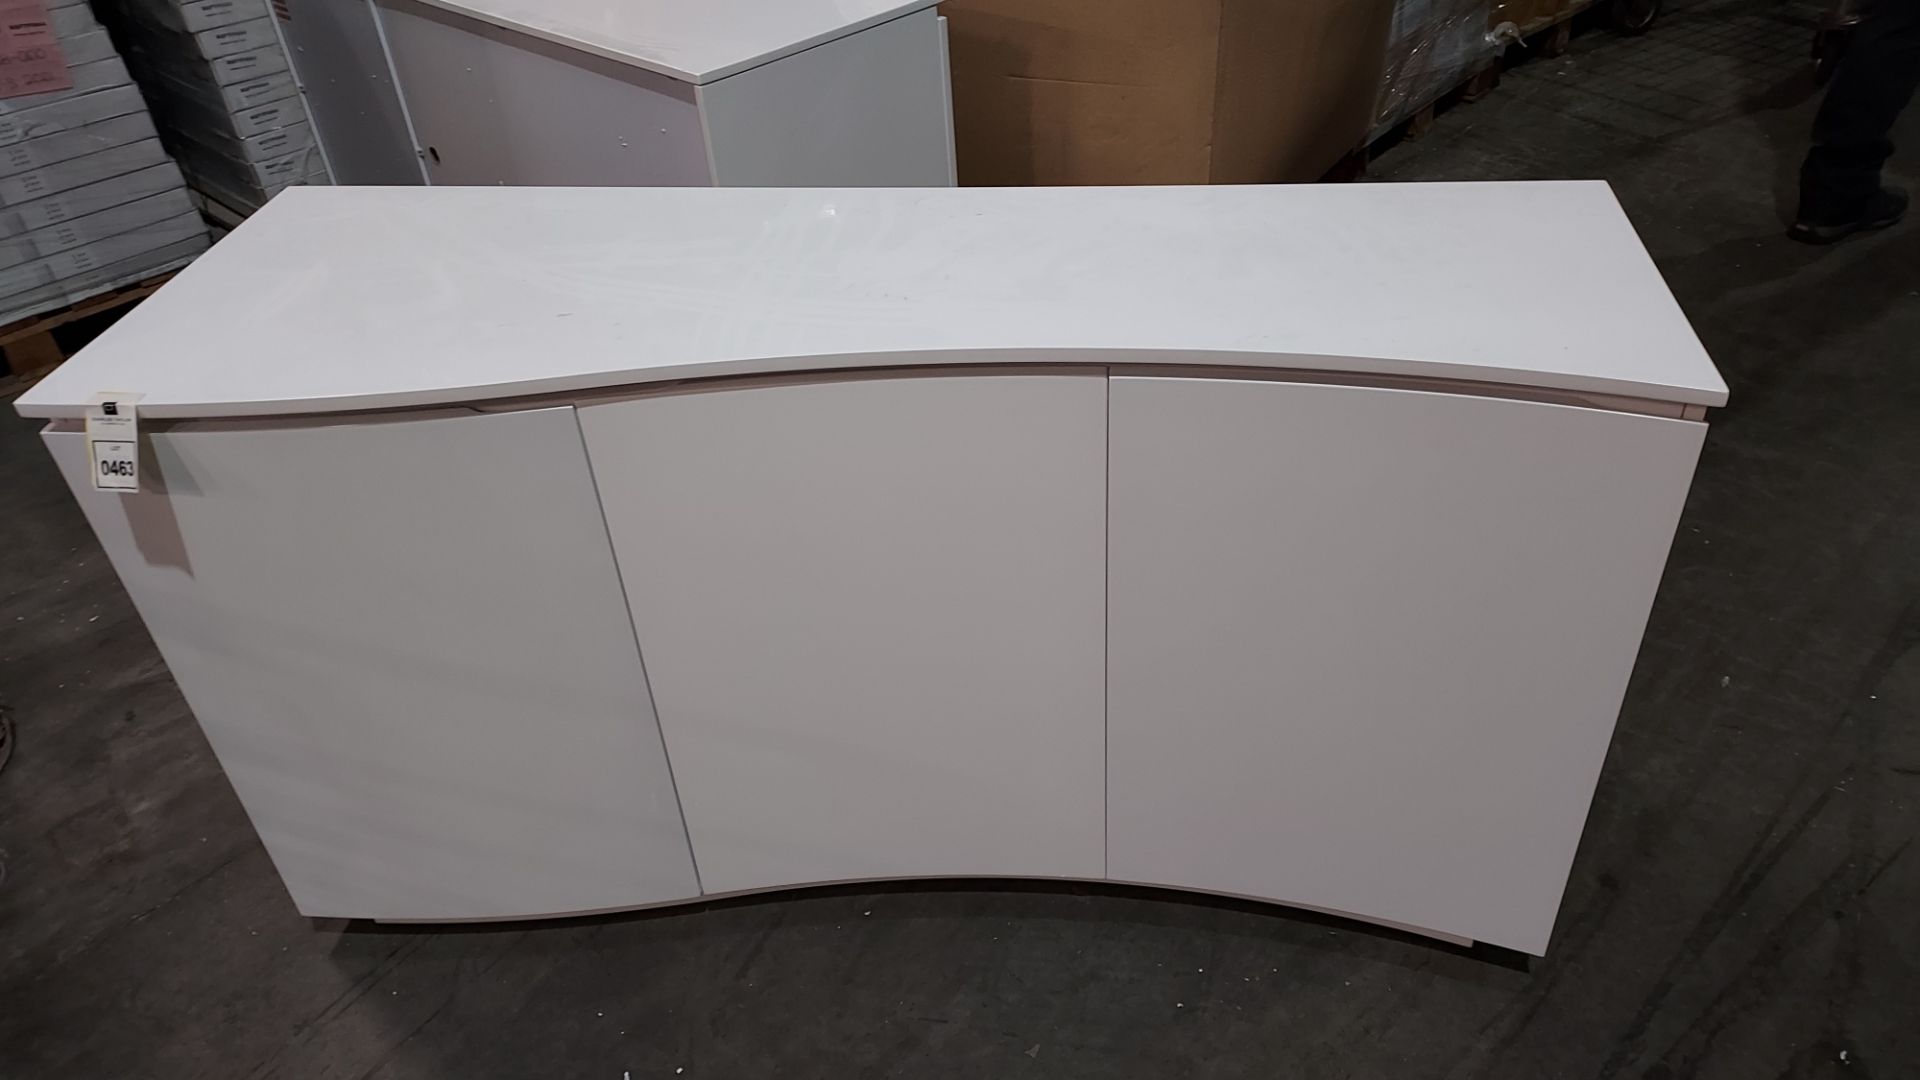 1 X LAZZARO SIDEBOARD IN WHITE WITH LED STRIP LIGHTS - SIZE 150 X 50 X 81CM (PLEASE NOTE CUSTOMER